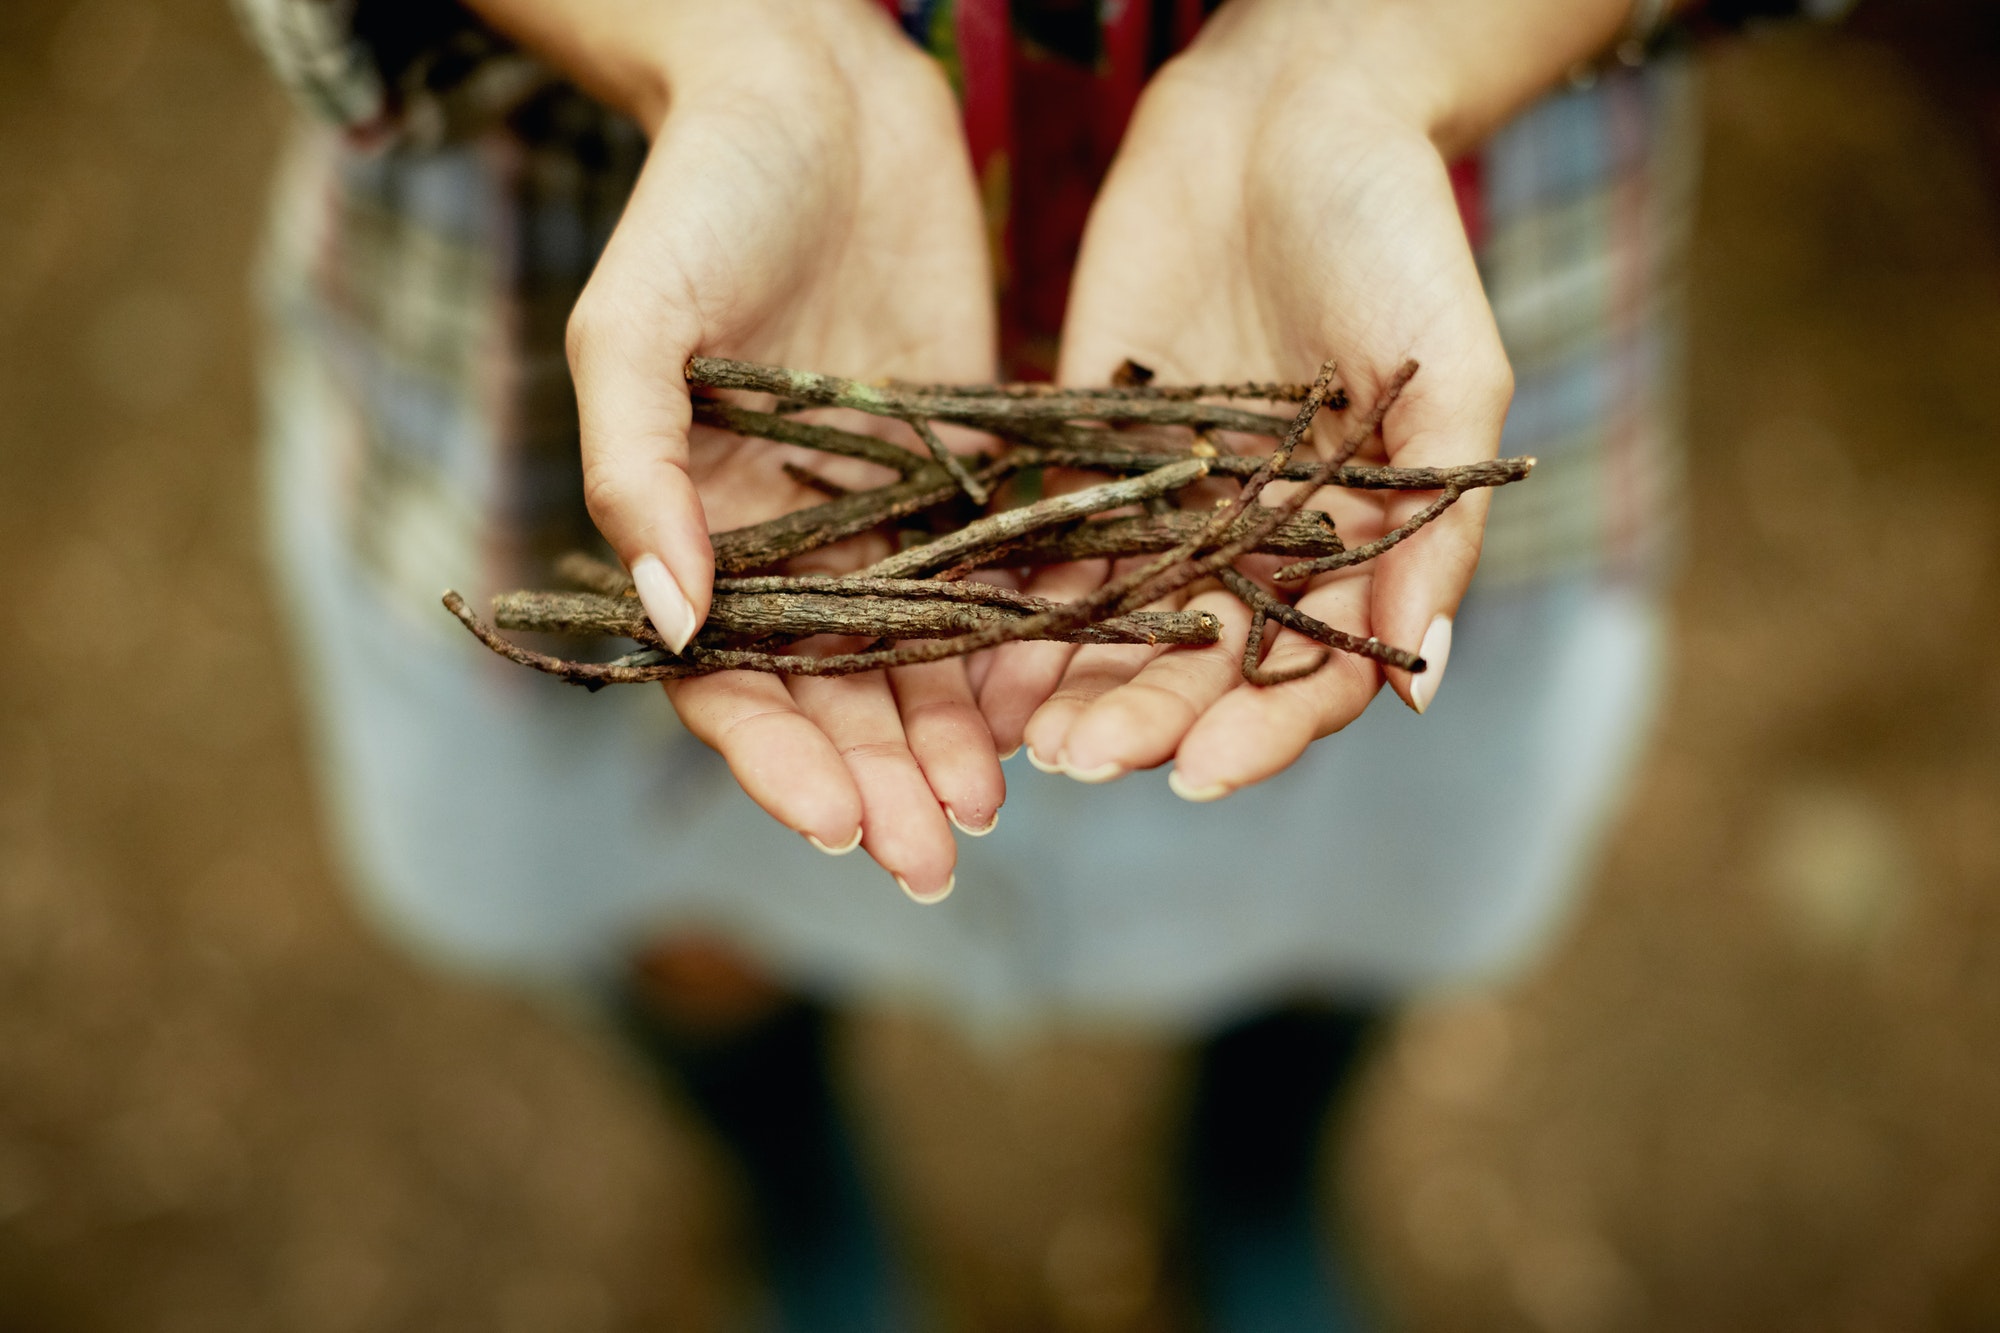 A person's hands holding a small bunch of twigs, kindling for the camp fire.